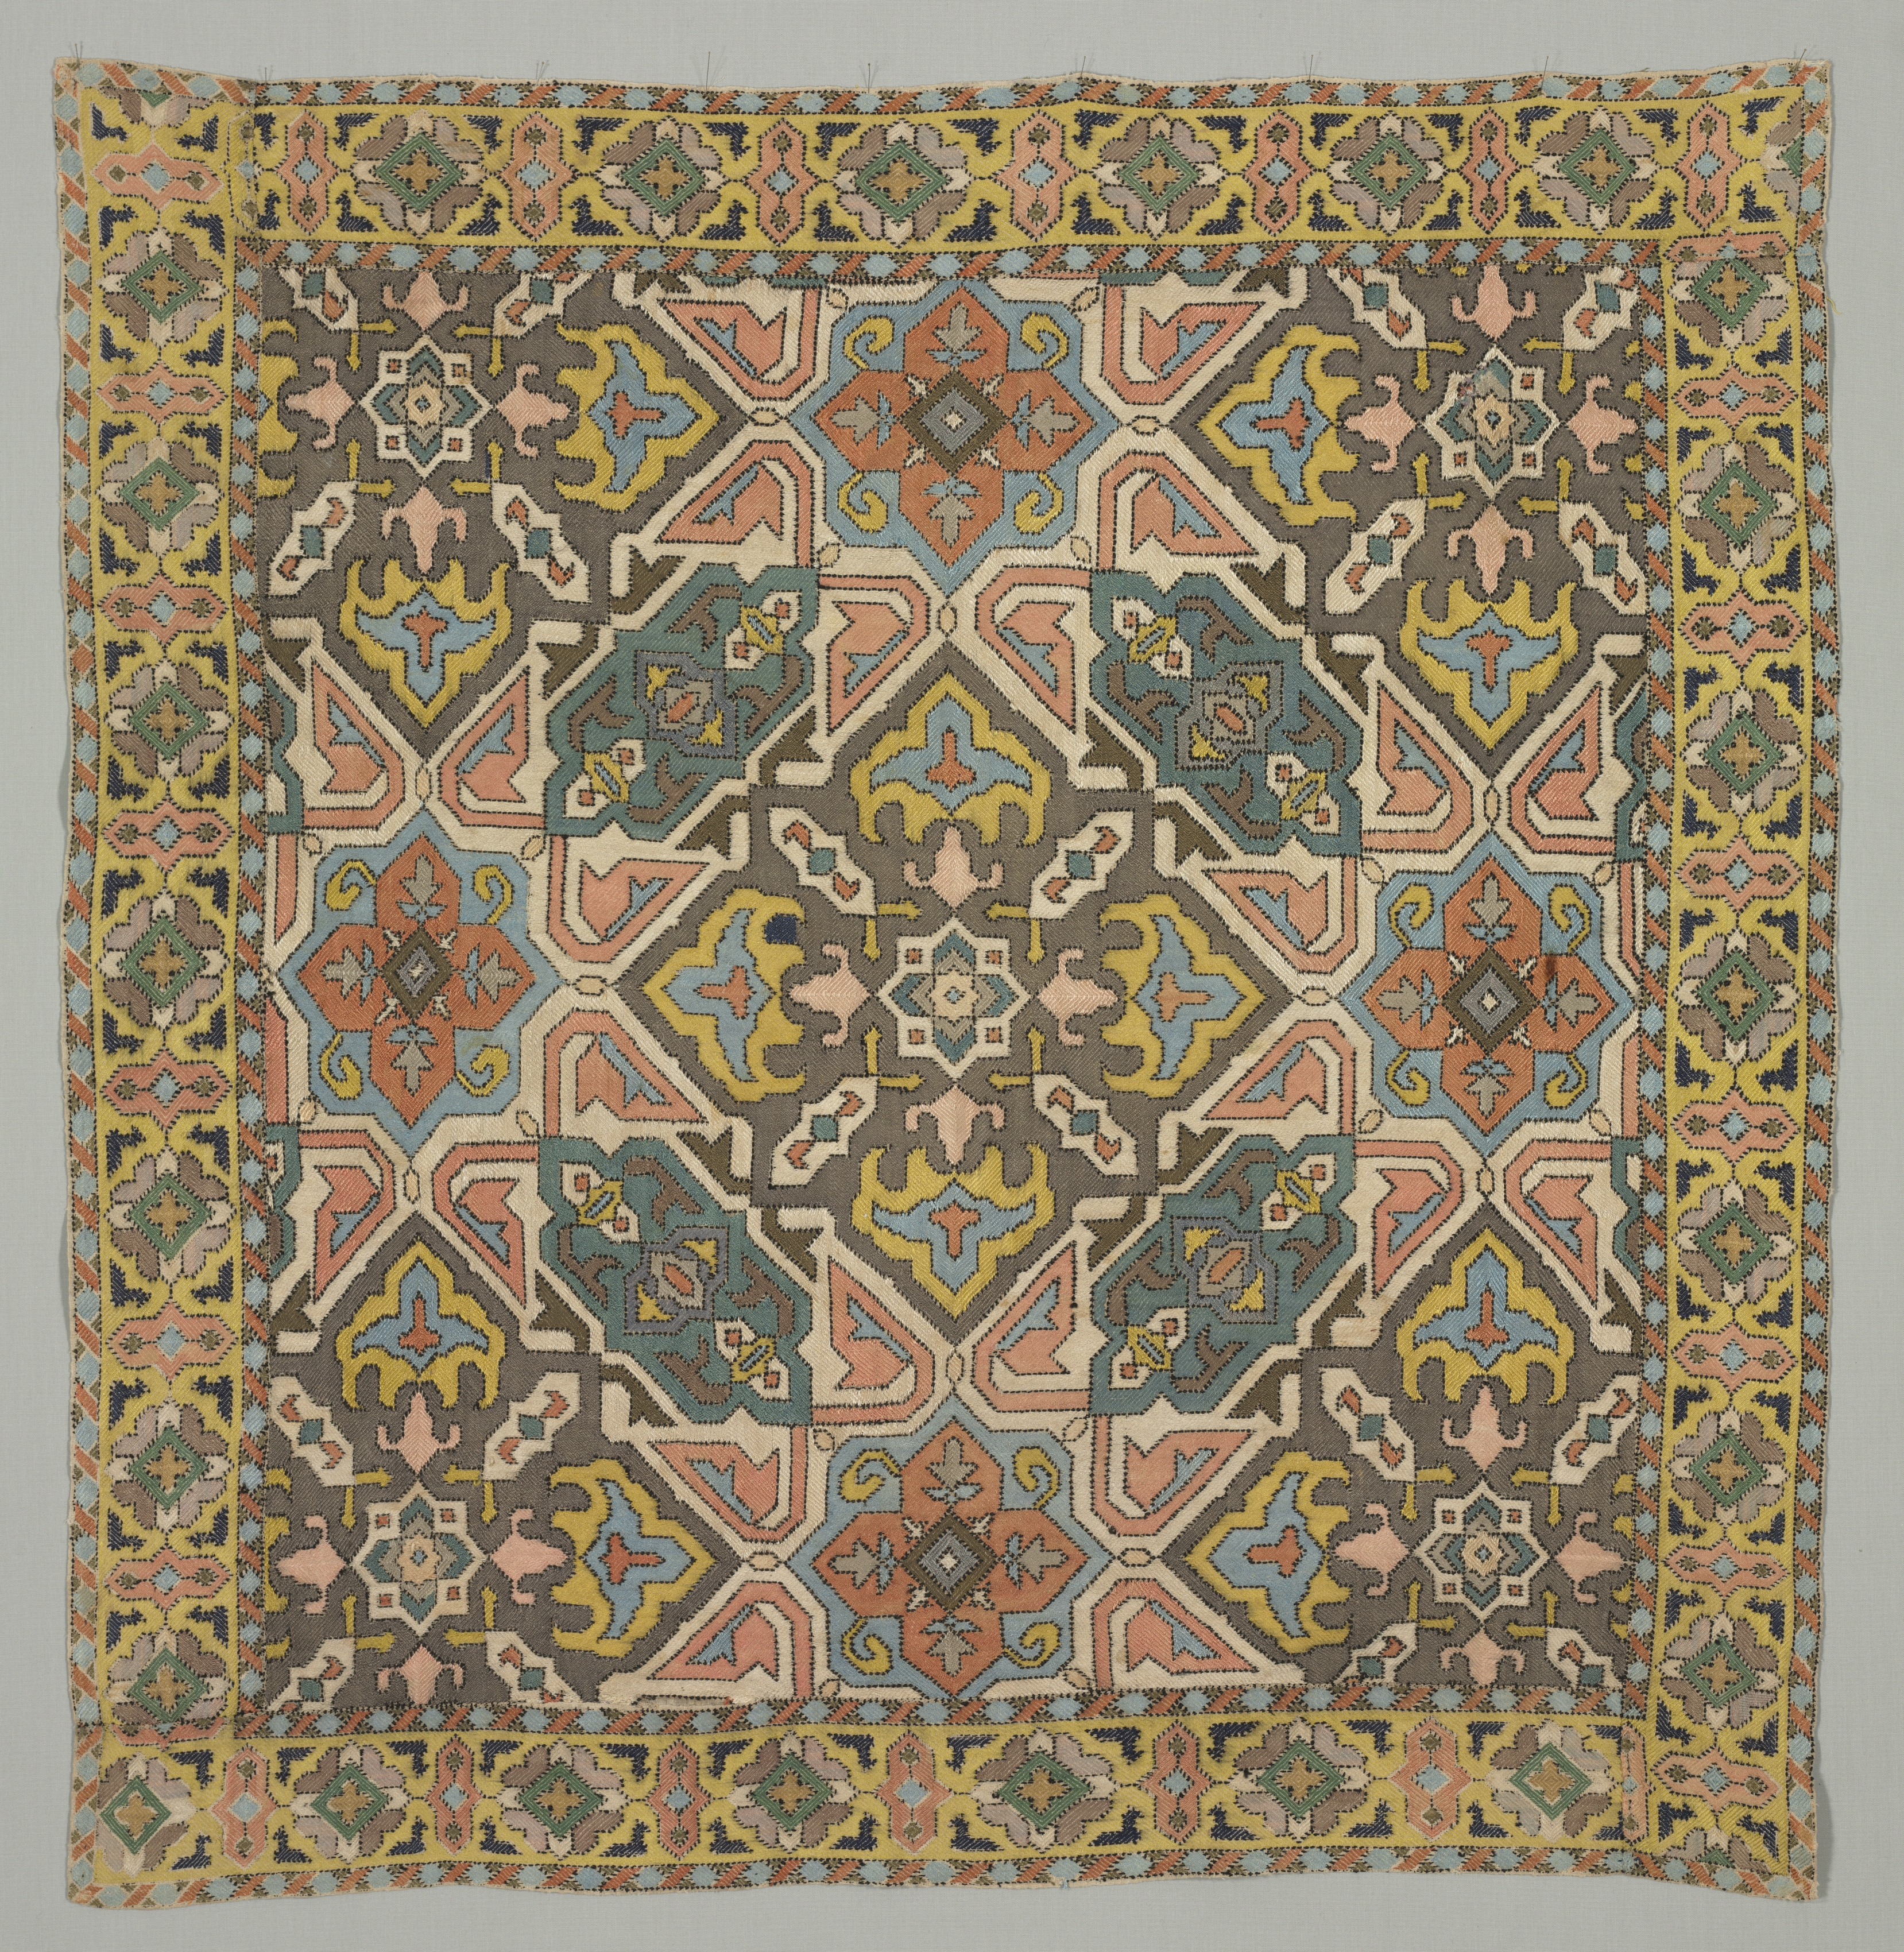 Cover with geometric design